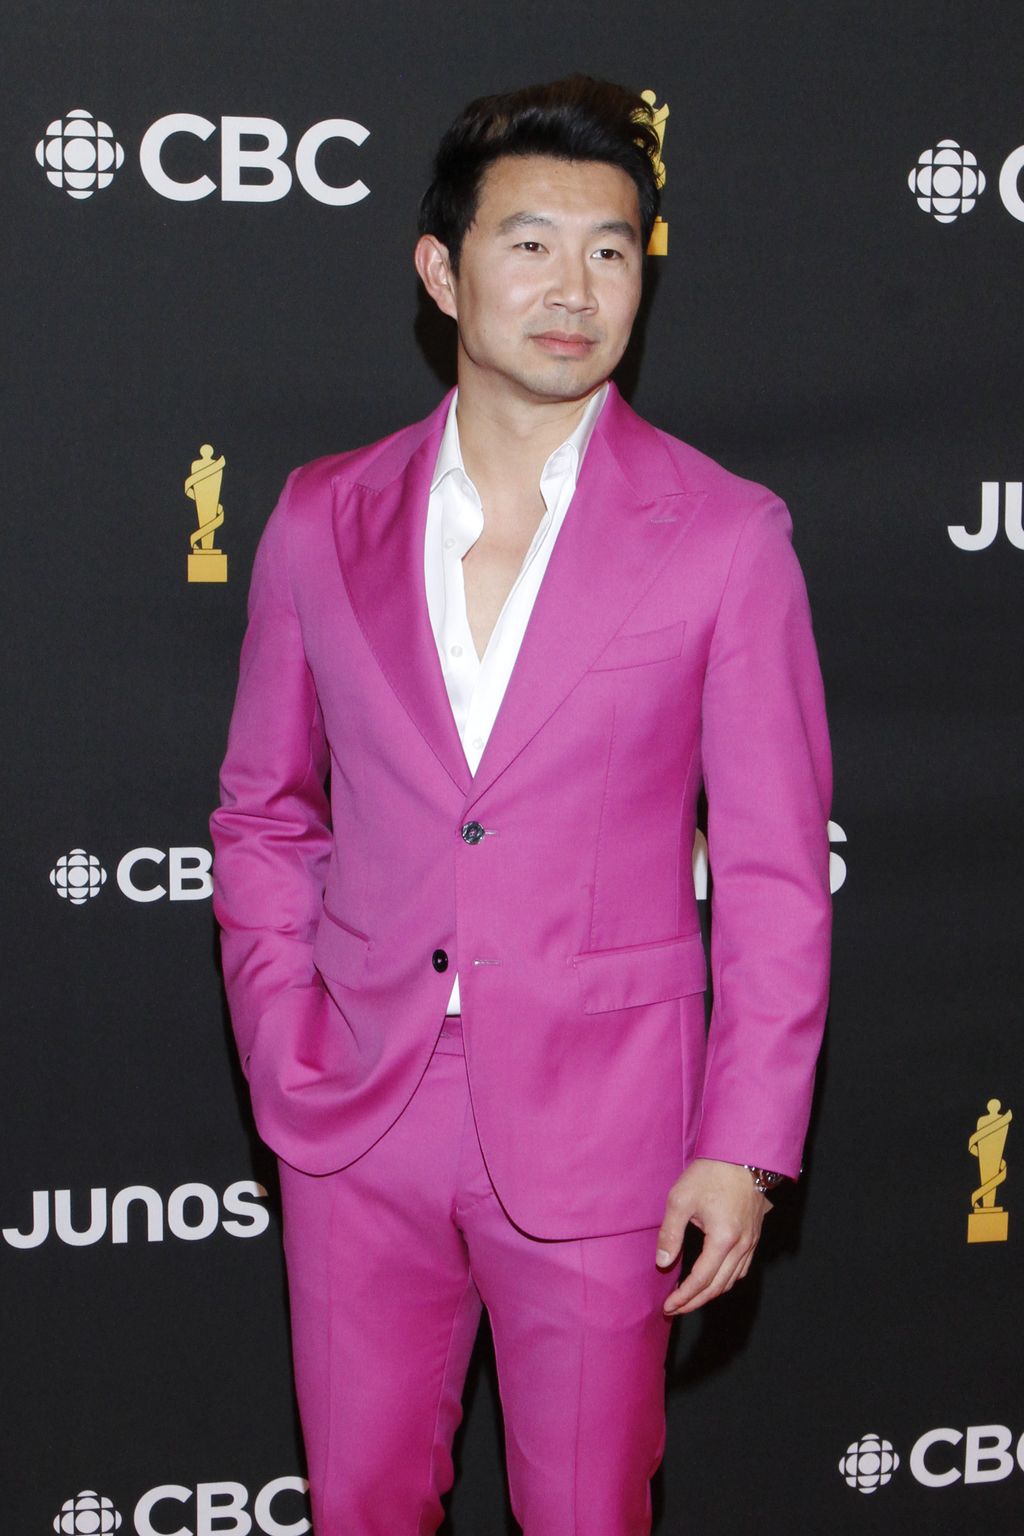 TORONTO, ONTARIO - MAY 15: Simu Liu attends the 2022 JUNO Awards Broadcast at Budweiser Stage on May 15, 2022 in Toronto, Ontario. (Photo by Jeremy Chan/Getty Images)